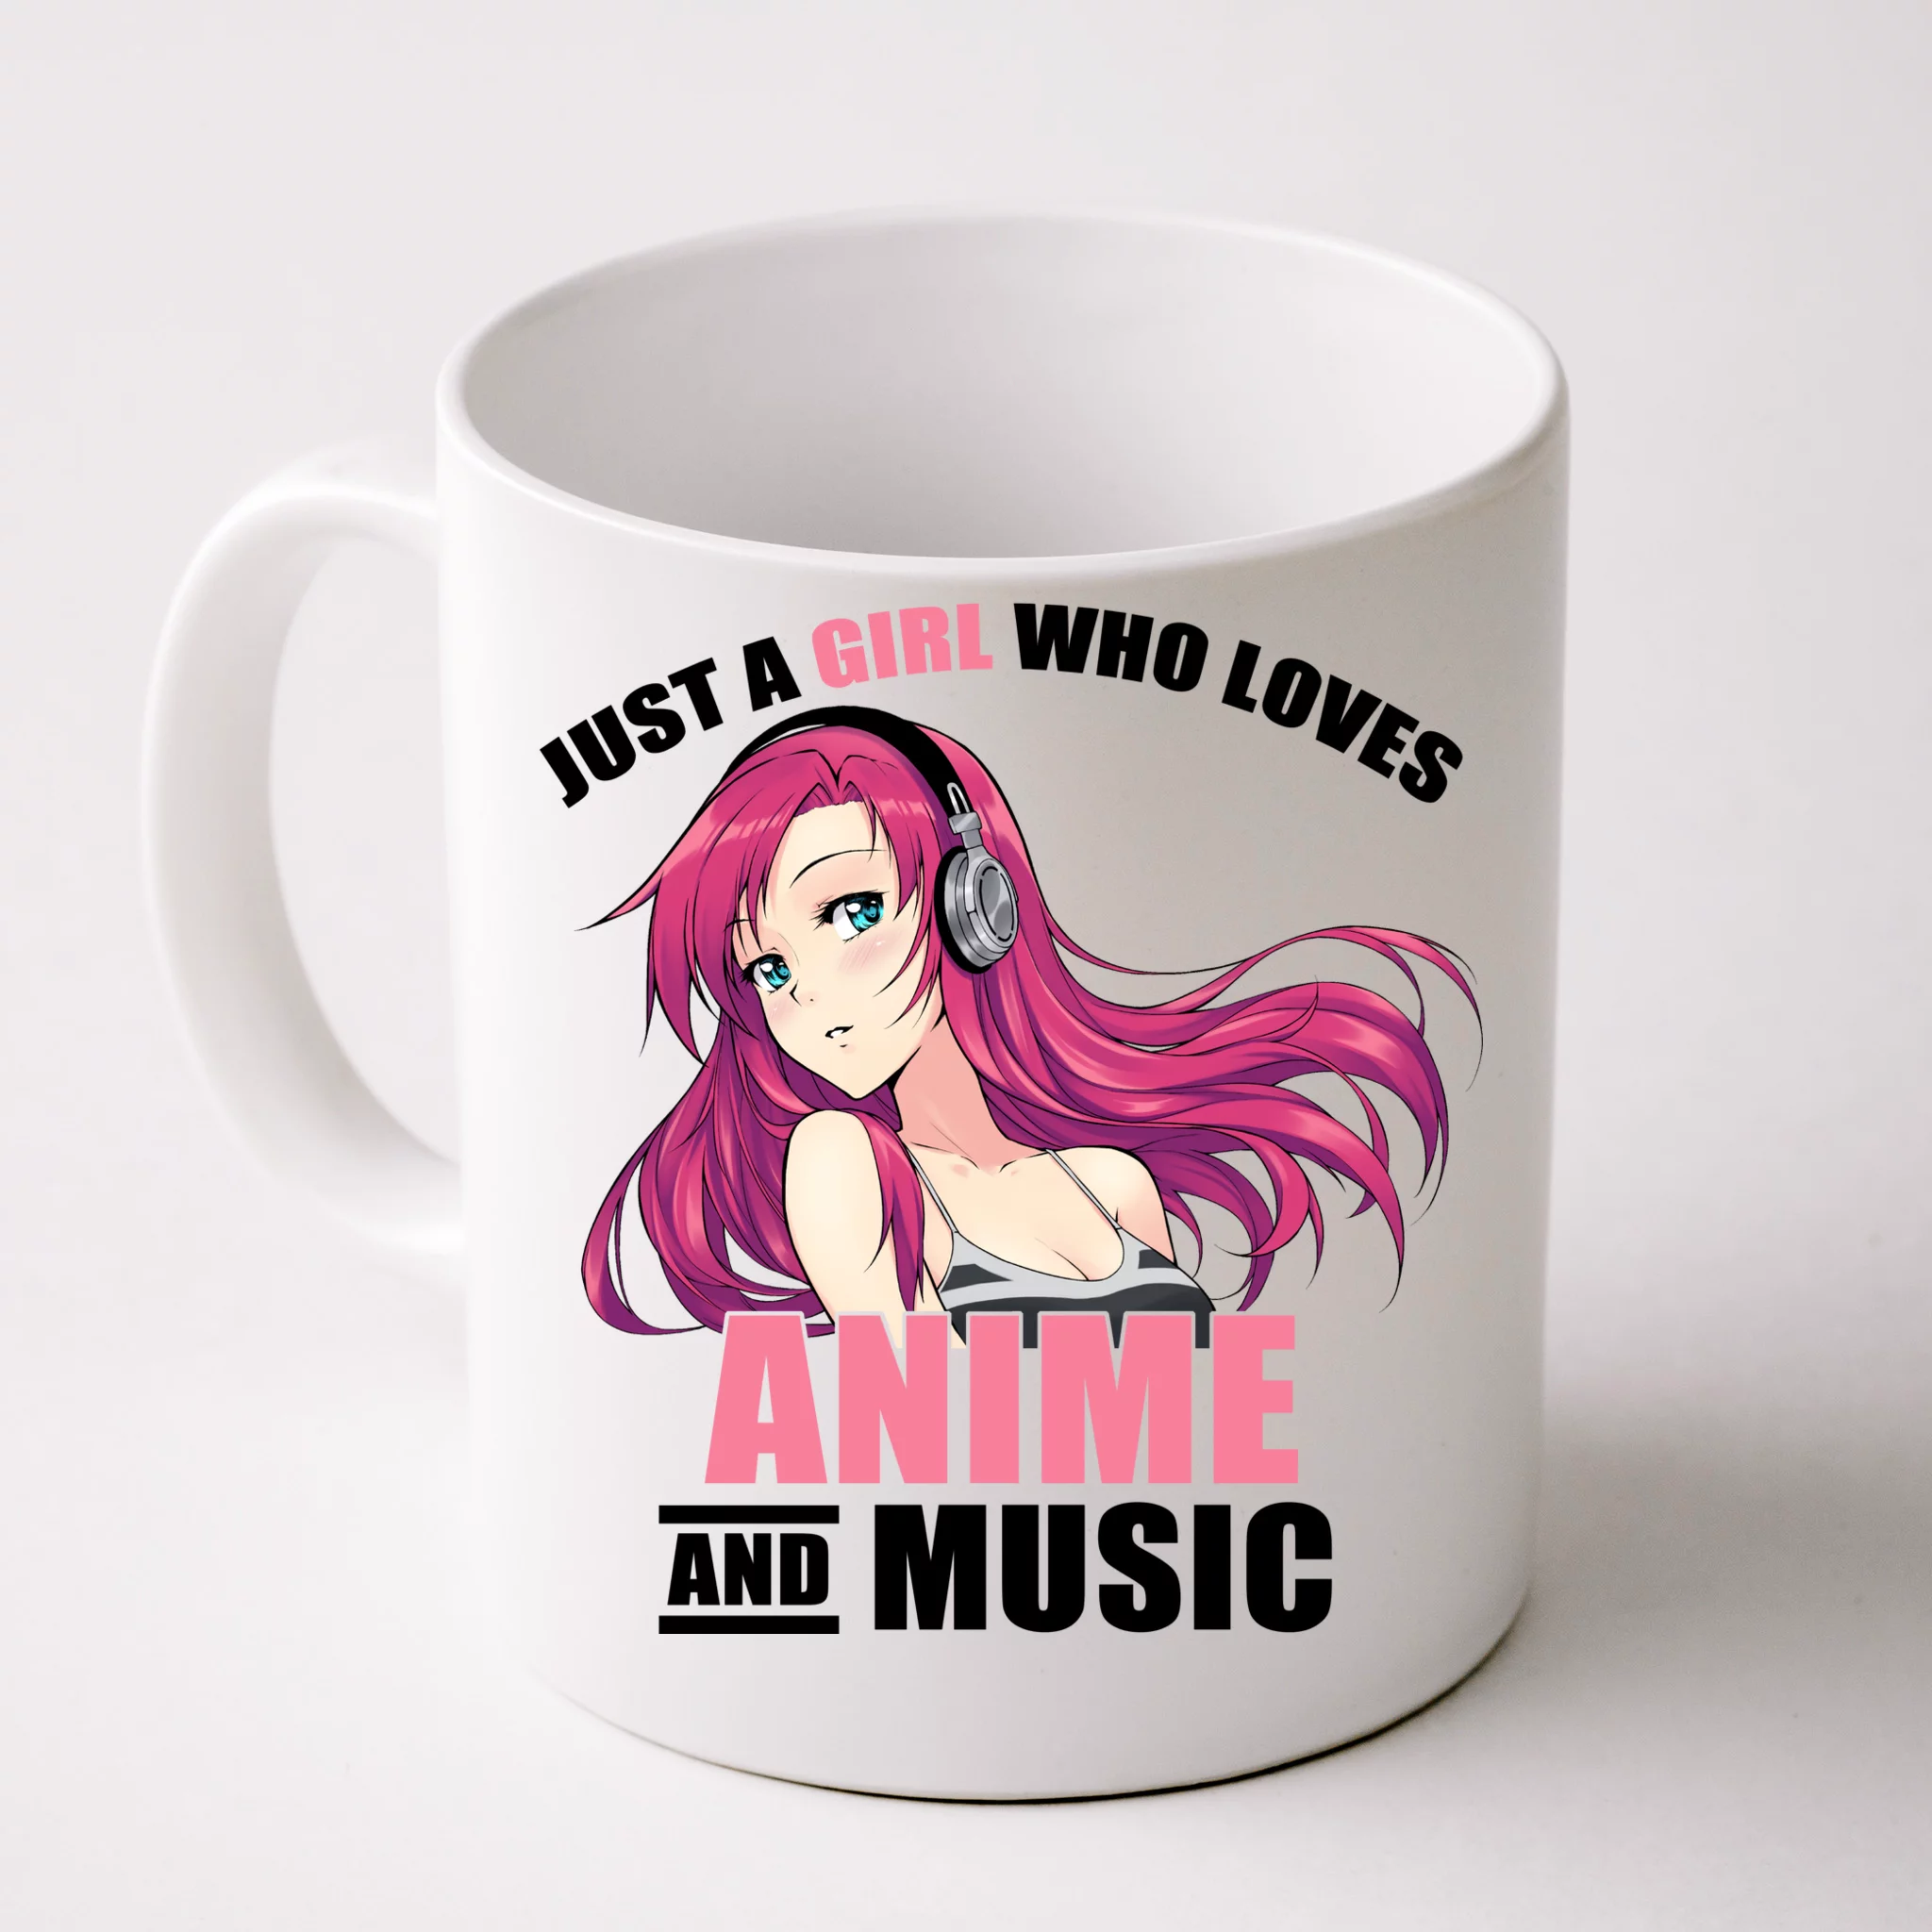 One Piece Anime Coffee Mug | One Piece Collection Cups | Ceramic Mugs Cup  Set Cup - One - Aliexpress